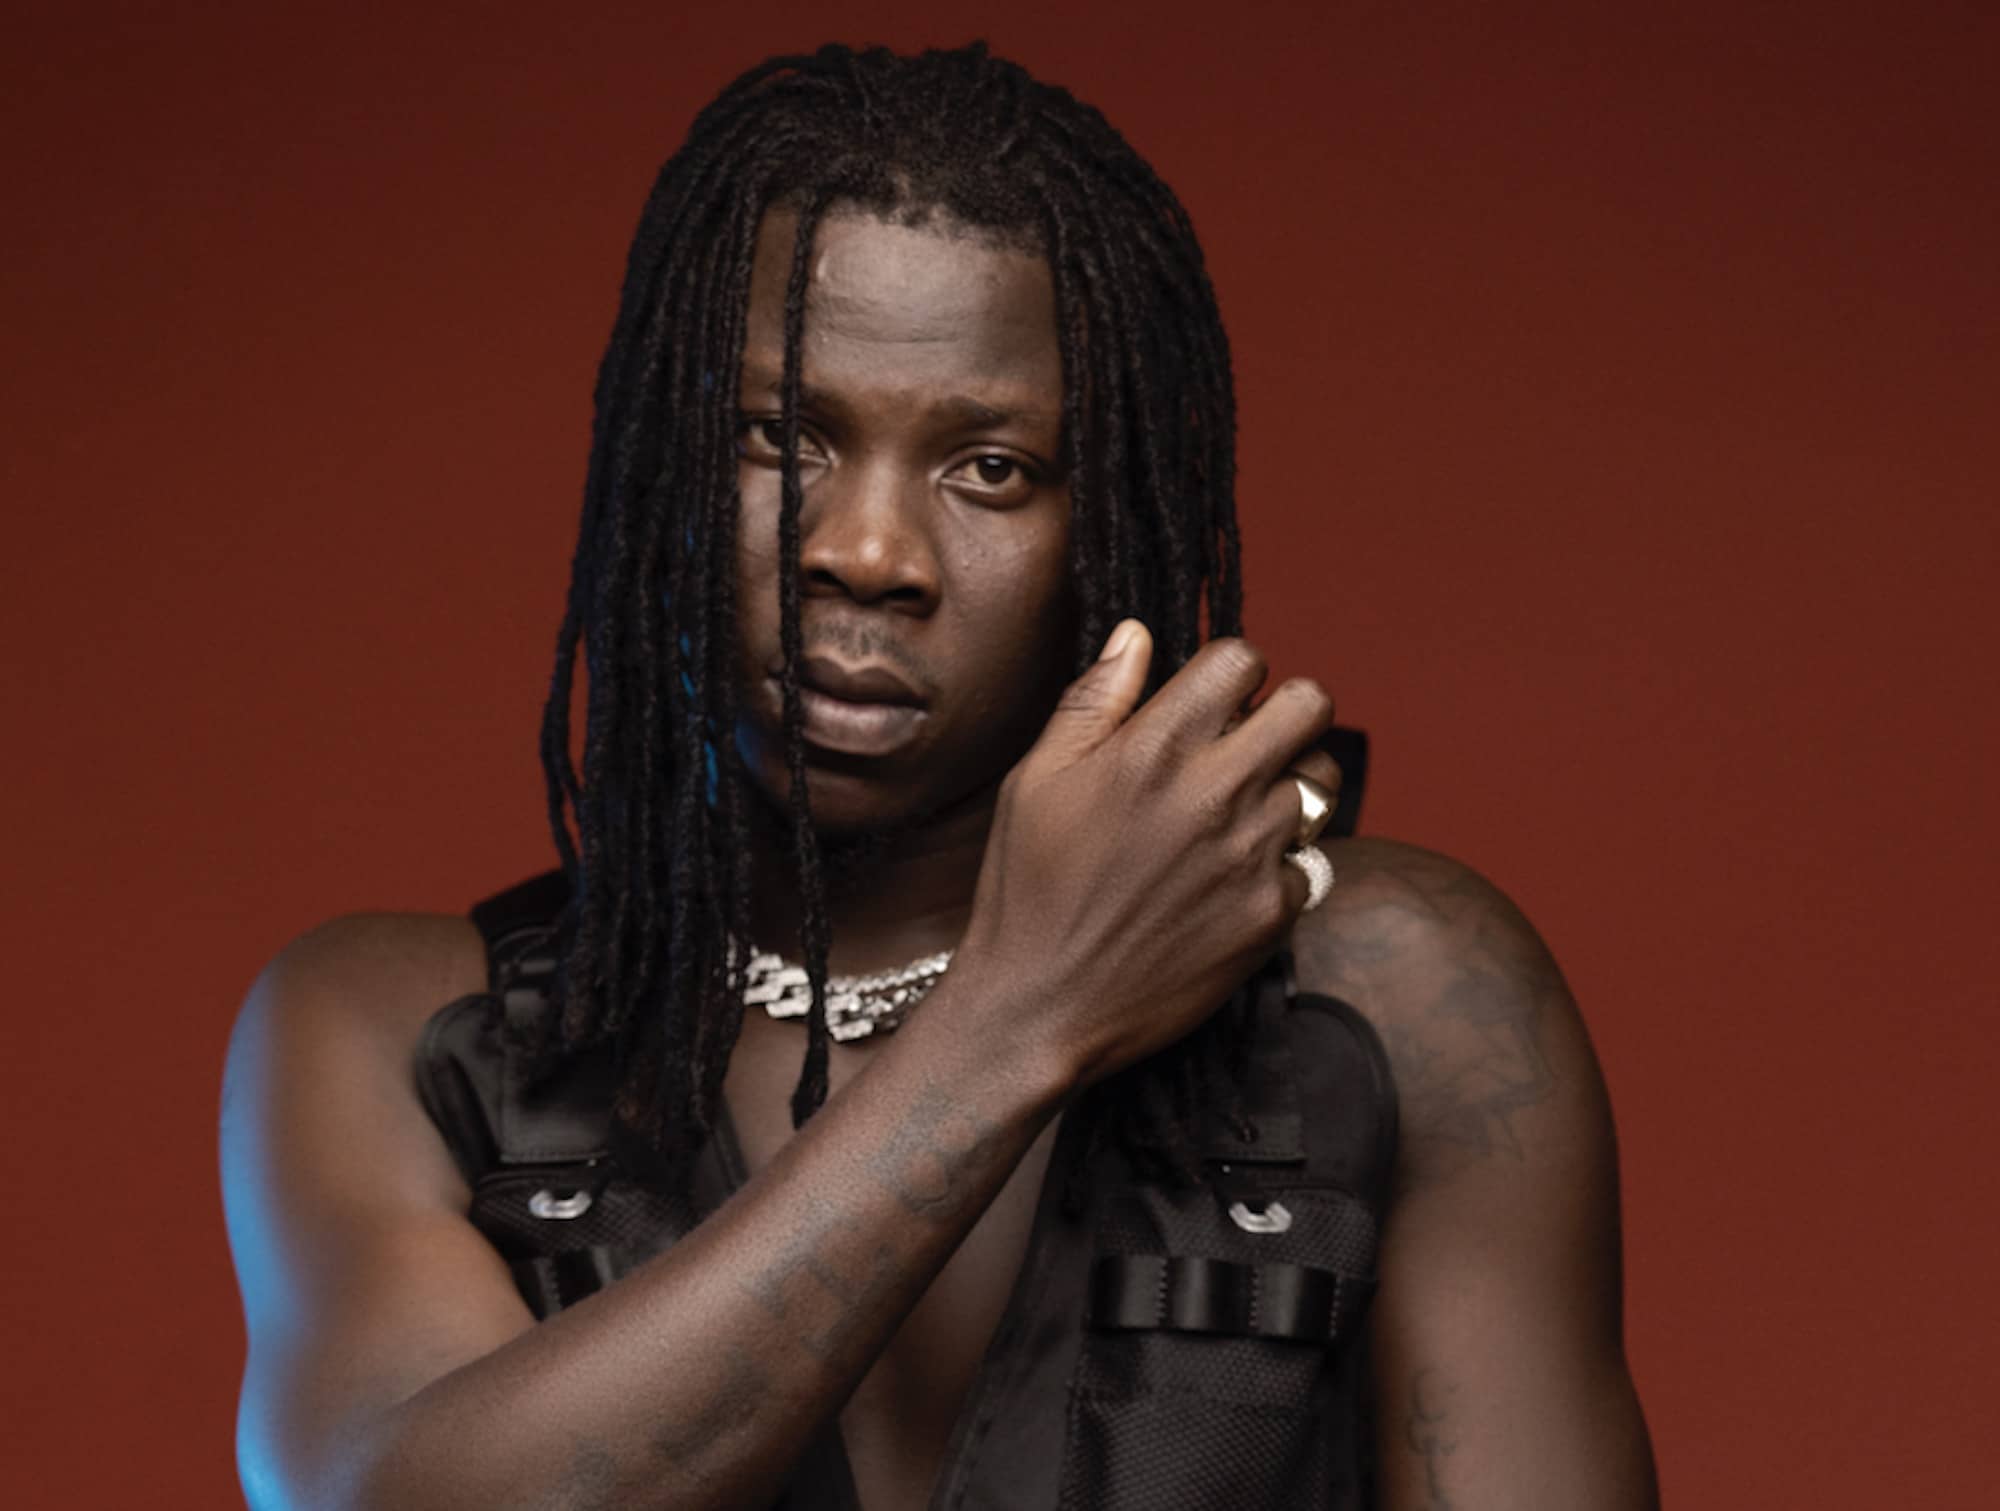 After a two-year ban, Stonebwoy returns to the VGMA